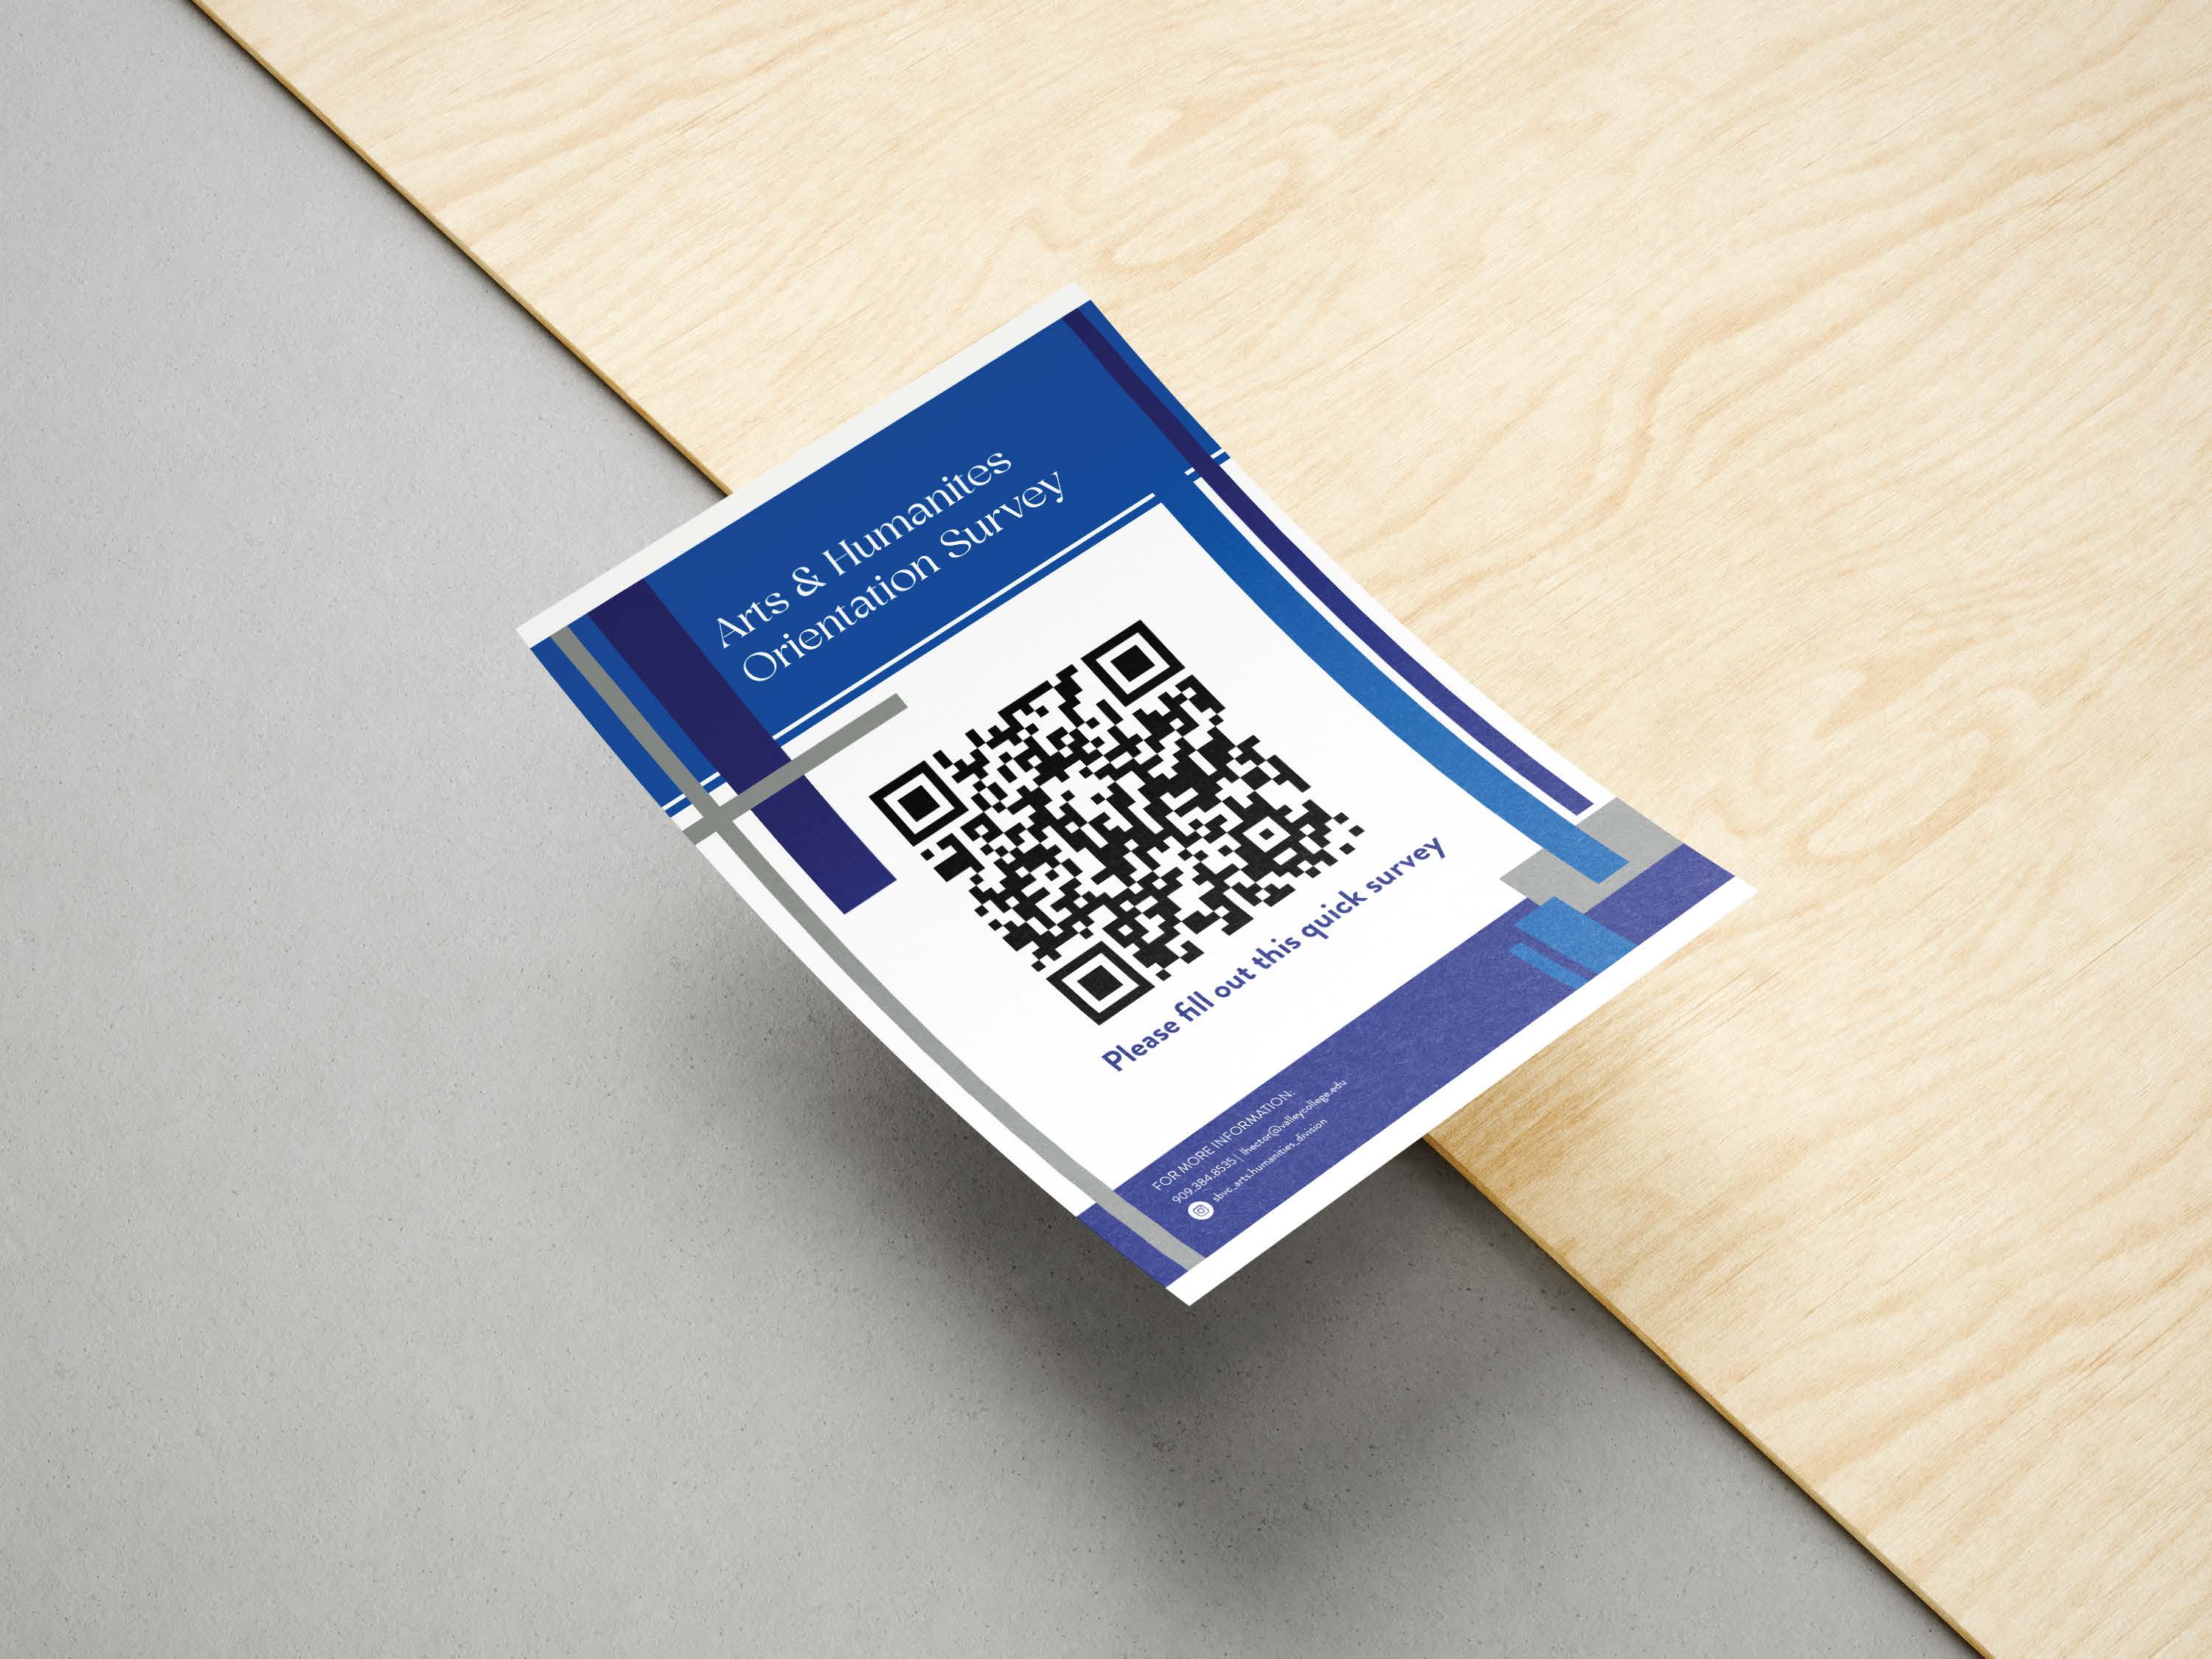 This flyer was placed on tables for the students to scan the QR code to complete a quick survey. This flyer features the same blues and grays as the Division Orientation Flyer